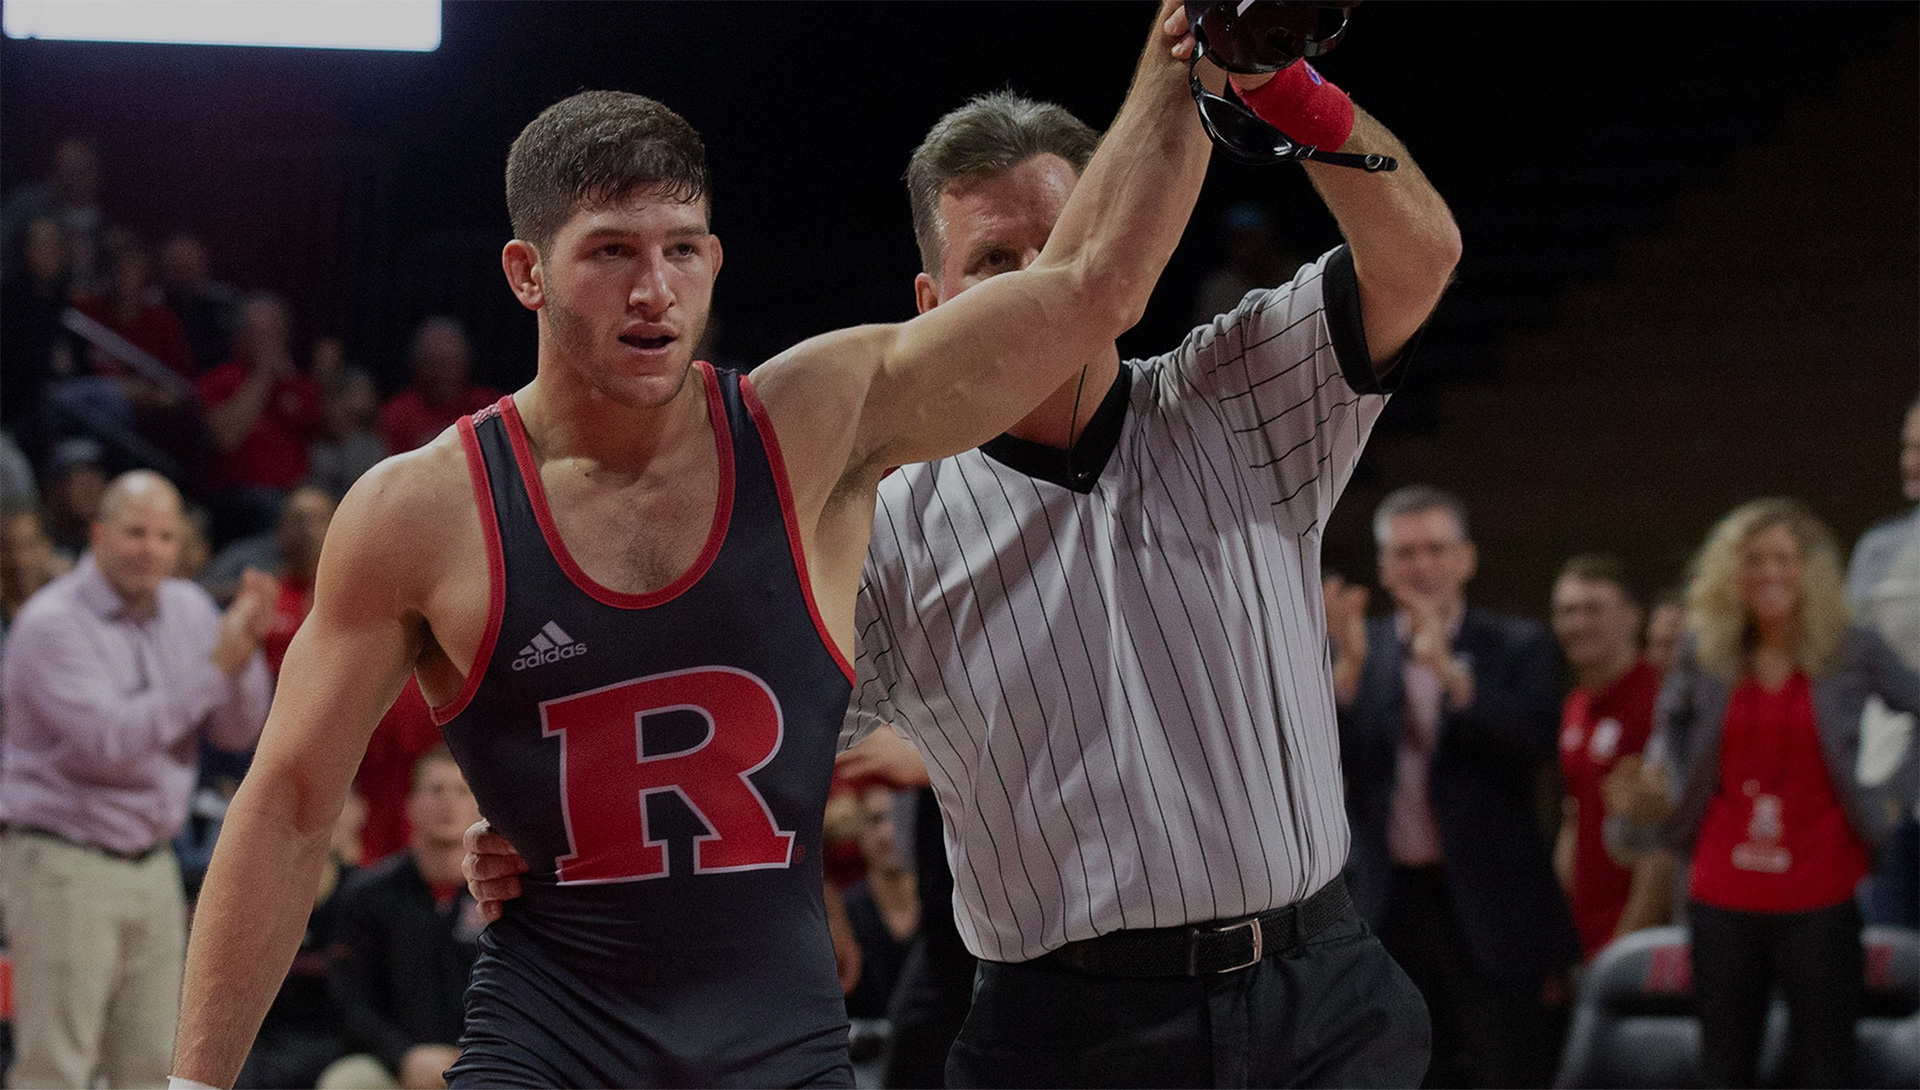 Anthony Ashnault finishes his Rutgers wrestling career with national title